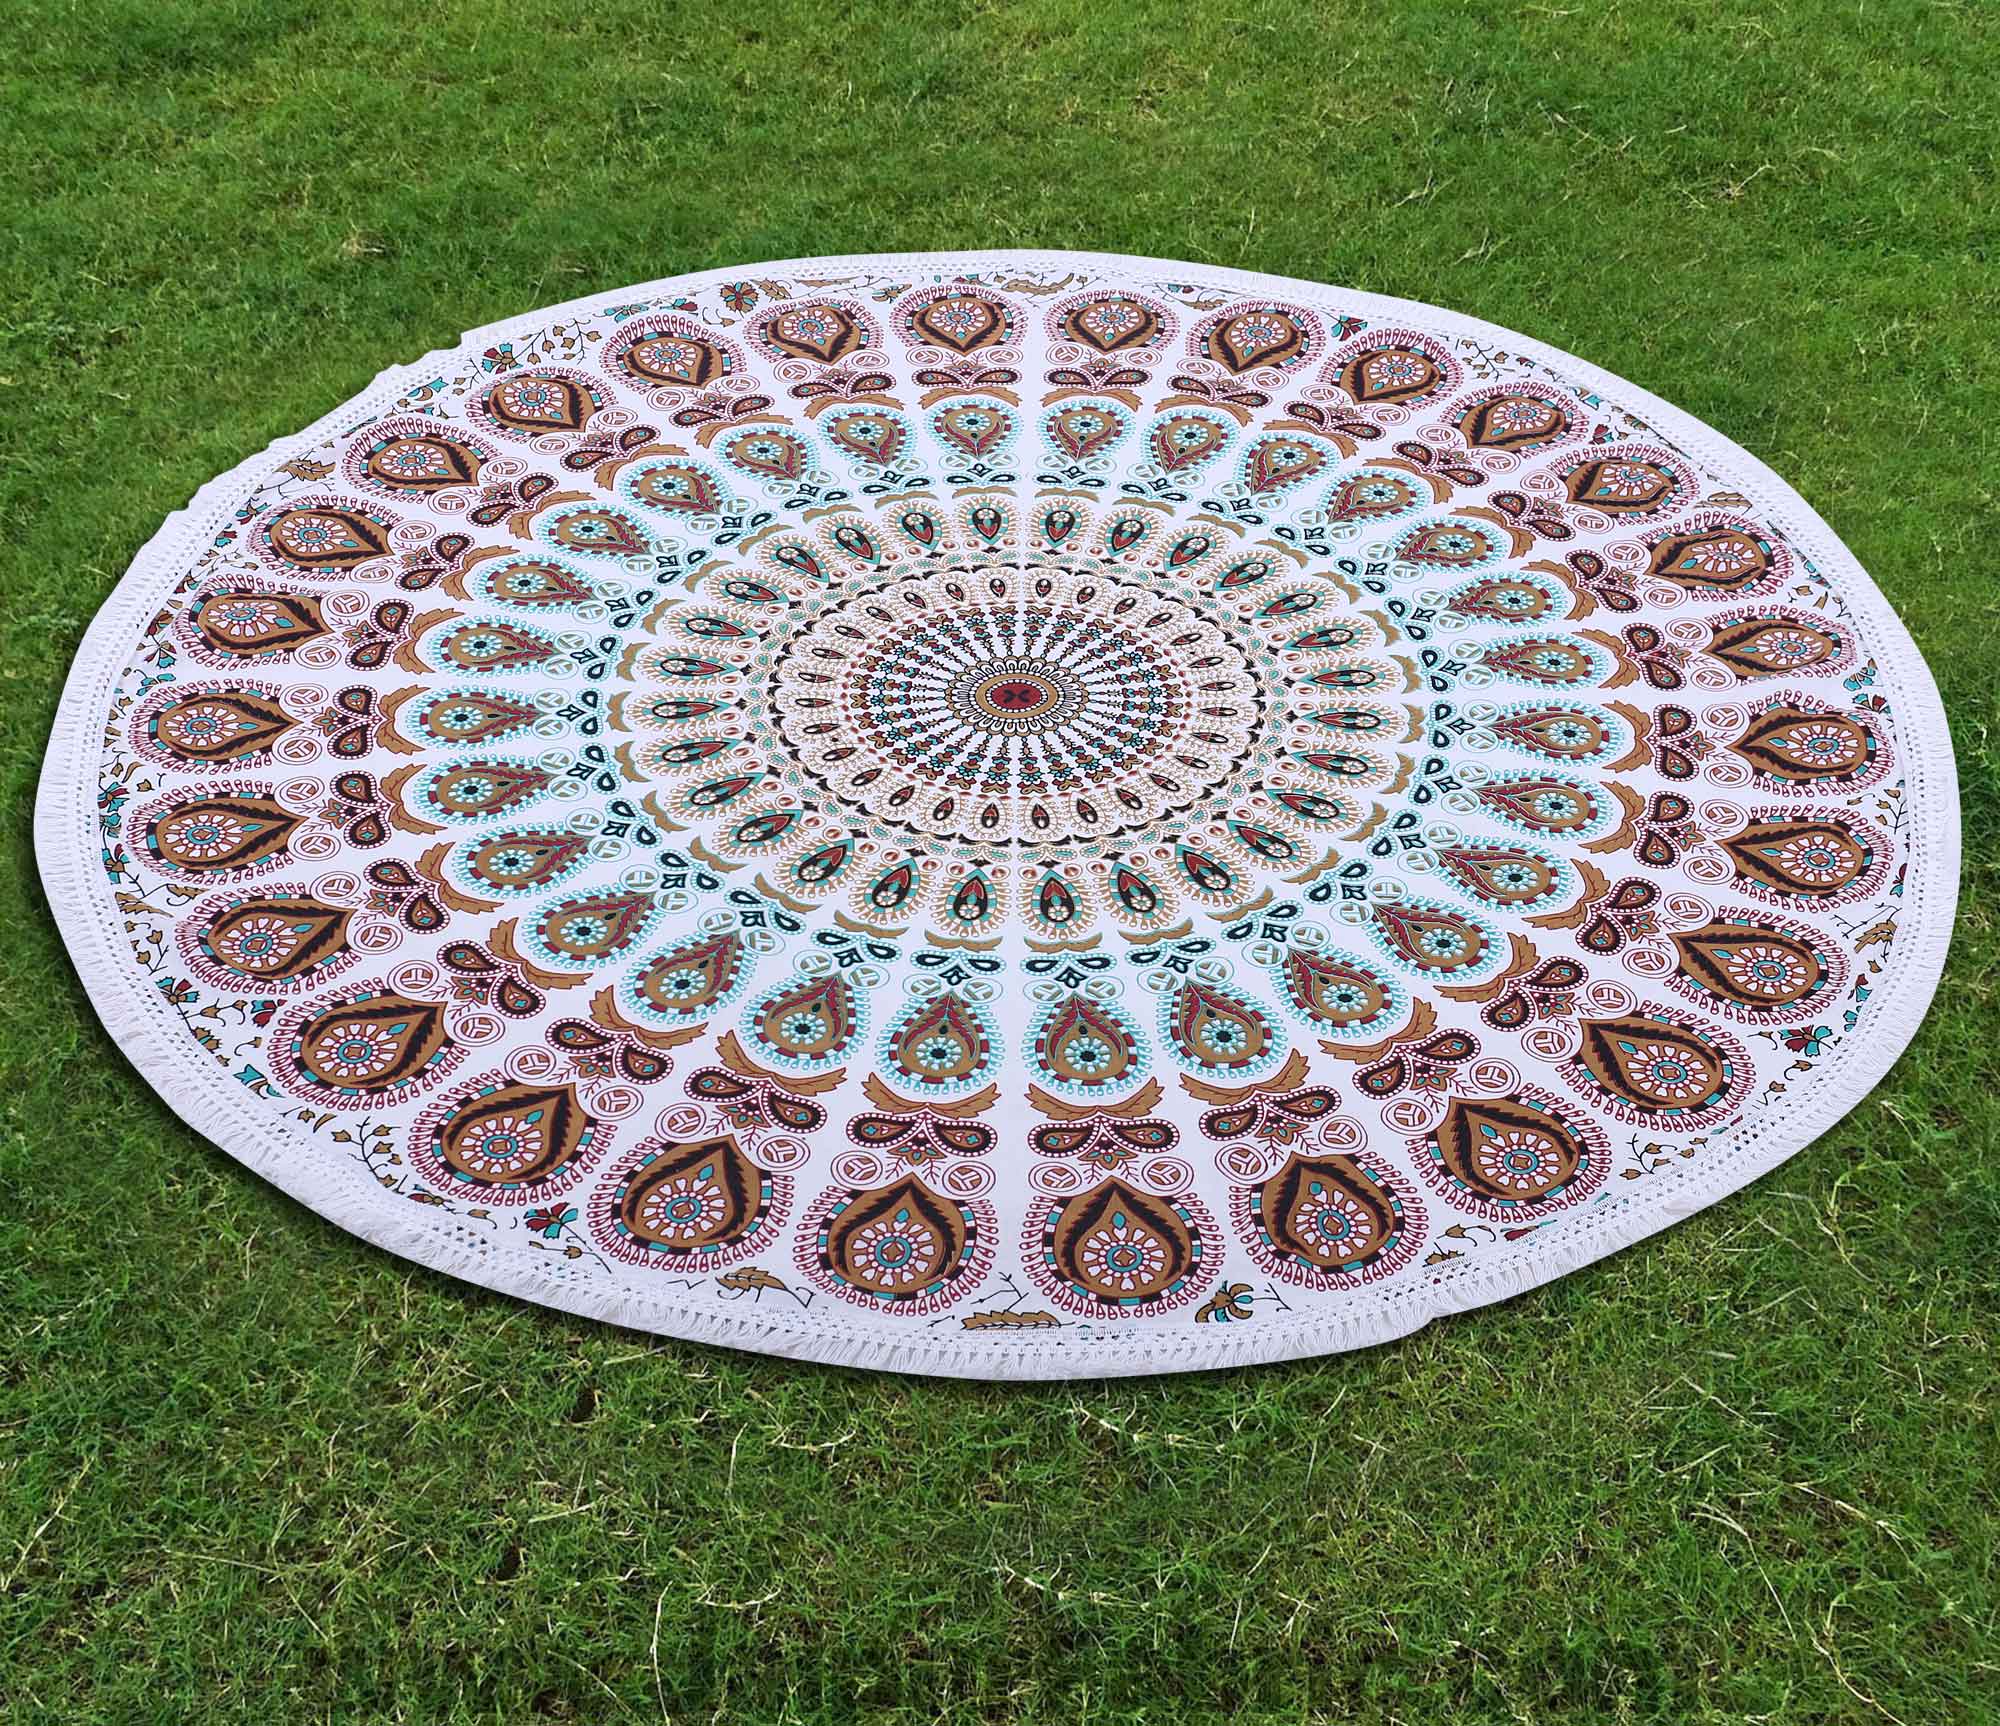 Red  Mandala Printed Wall Hanging Round Roundies Beach Throw Cotton Yoga Mat Table Cloths Table Cover Picnic Mat Tapestry Picnic Blanket Mat 72